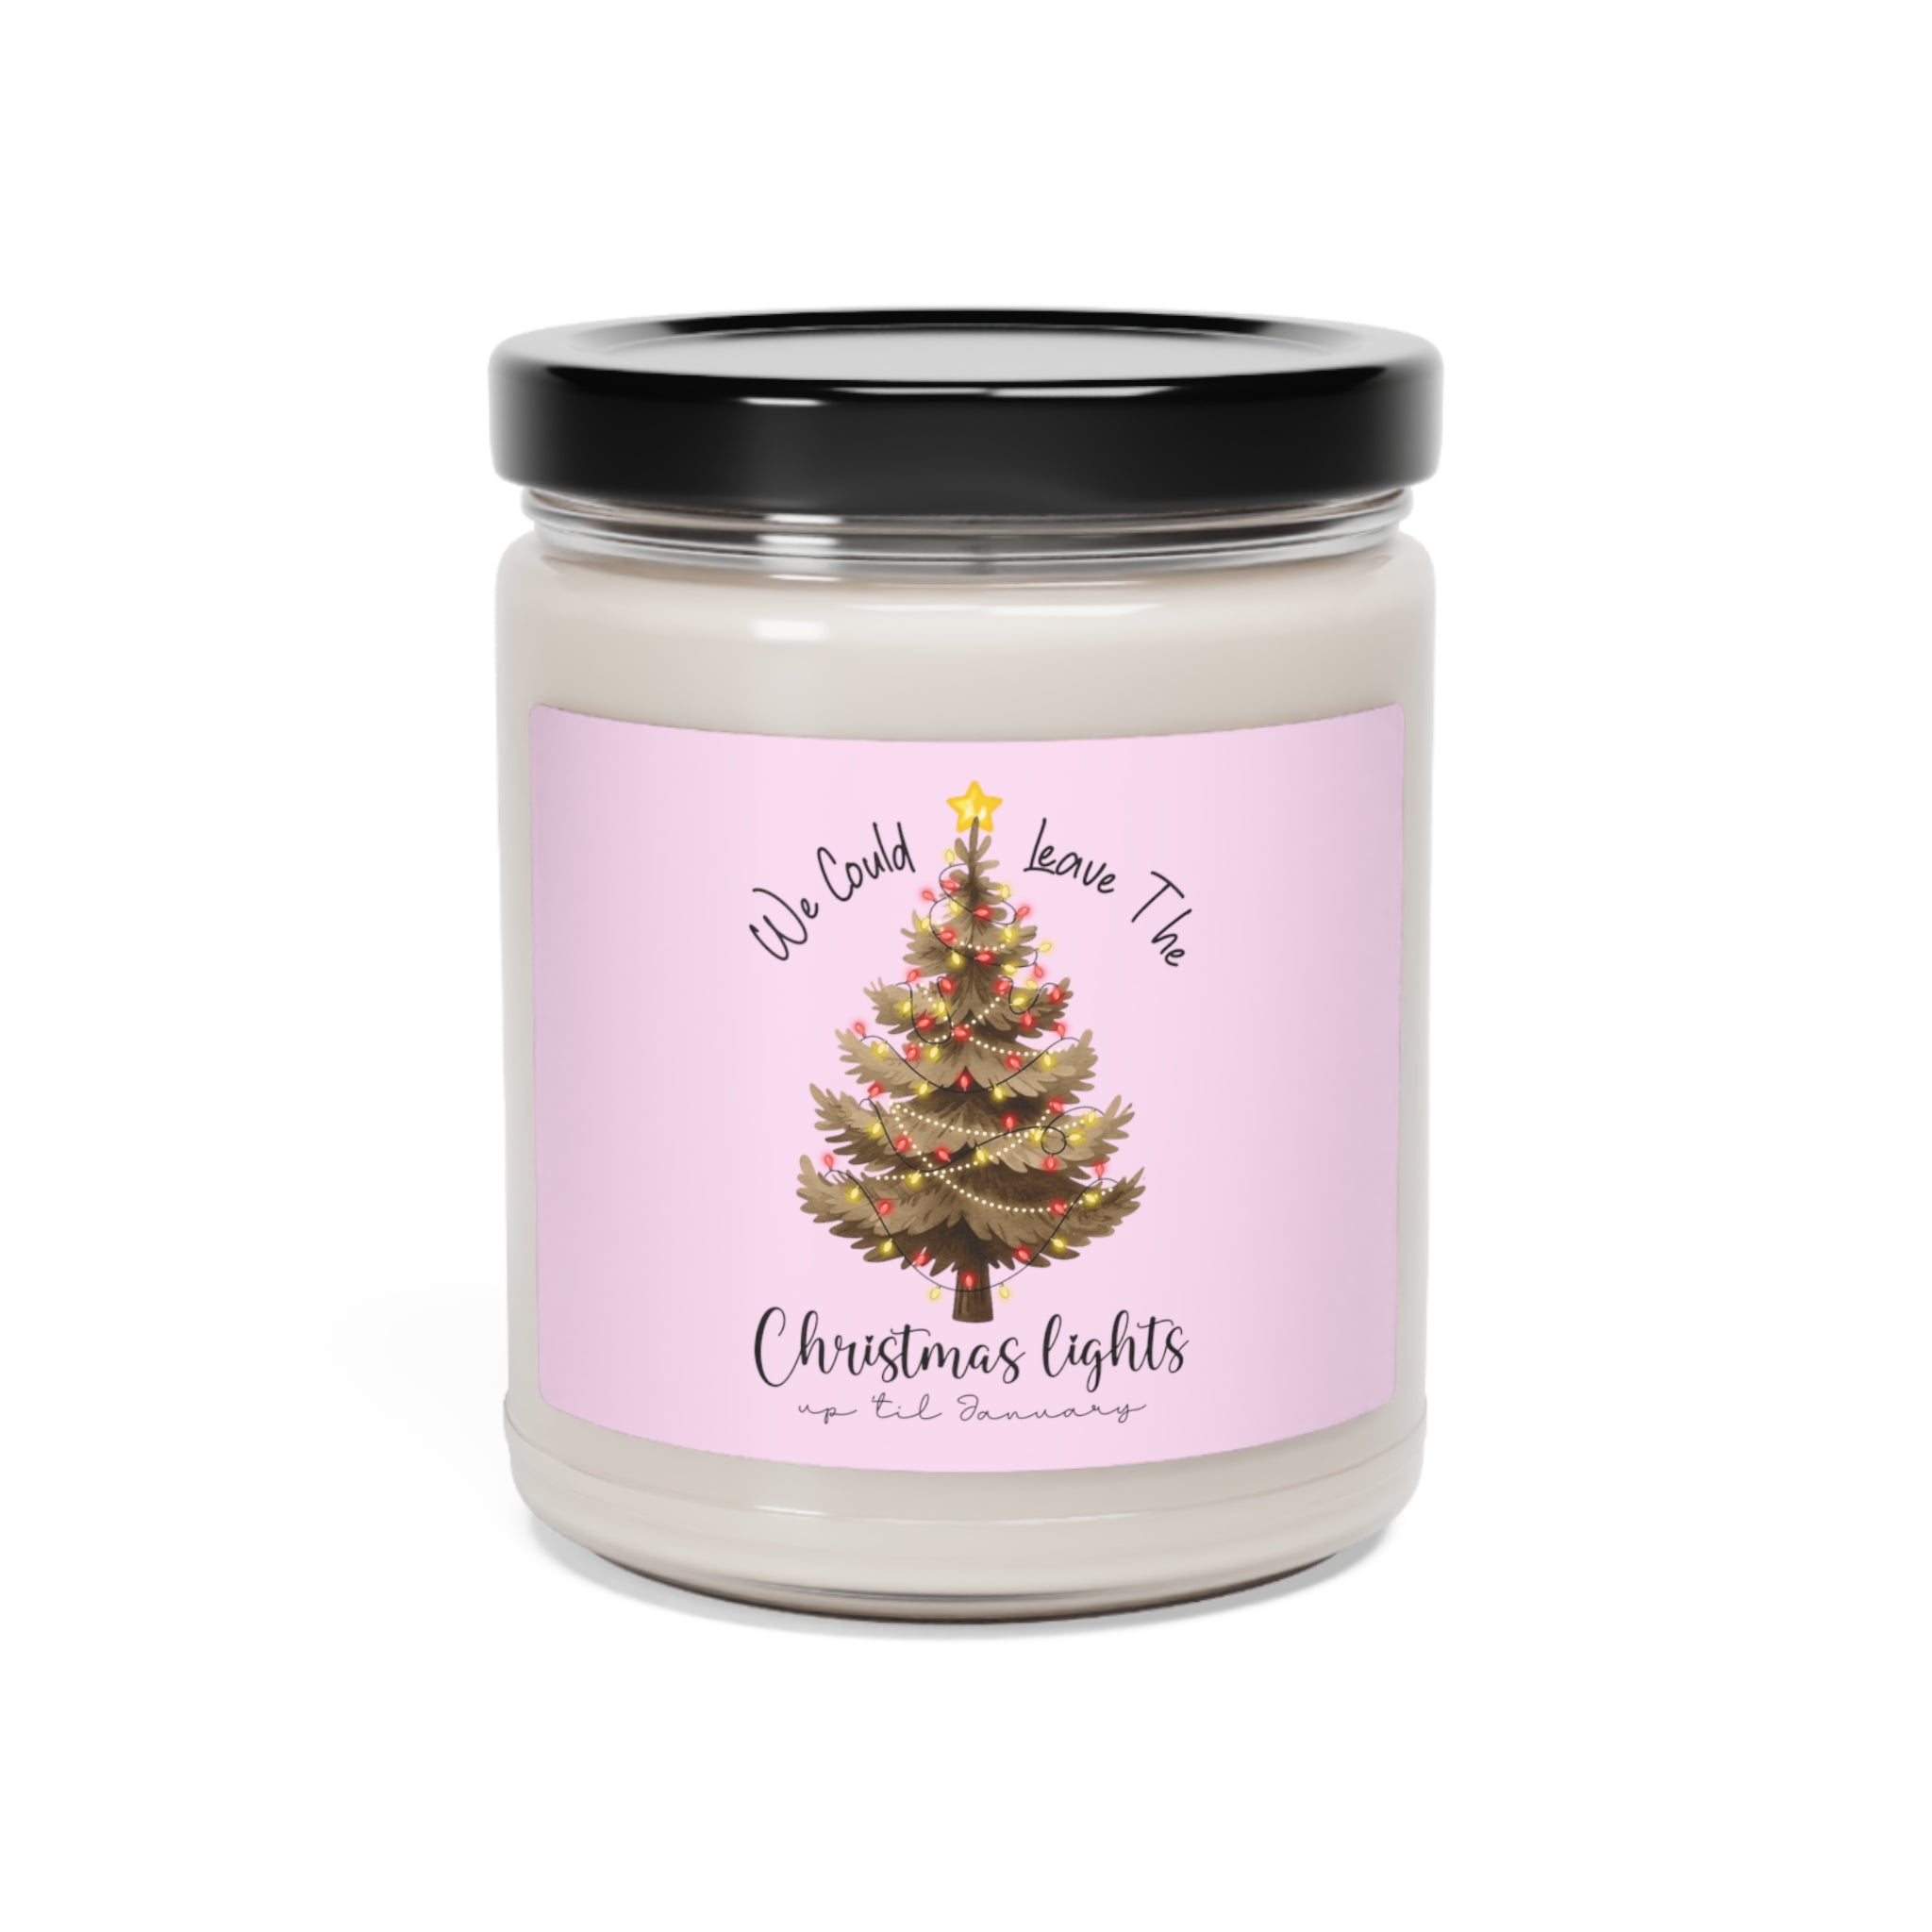 We Could Leave the Christmas Lights Up 'Til January Taylor Swift Scented Soy Candles